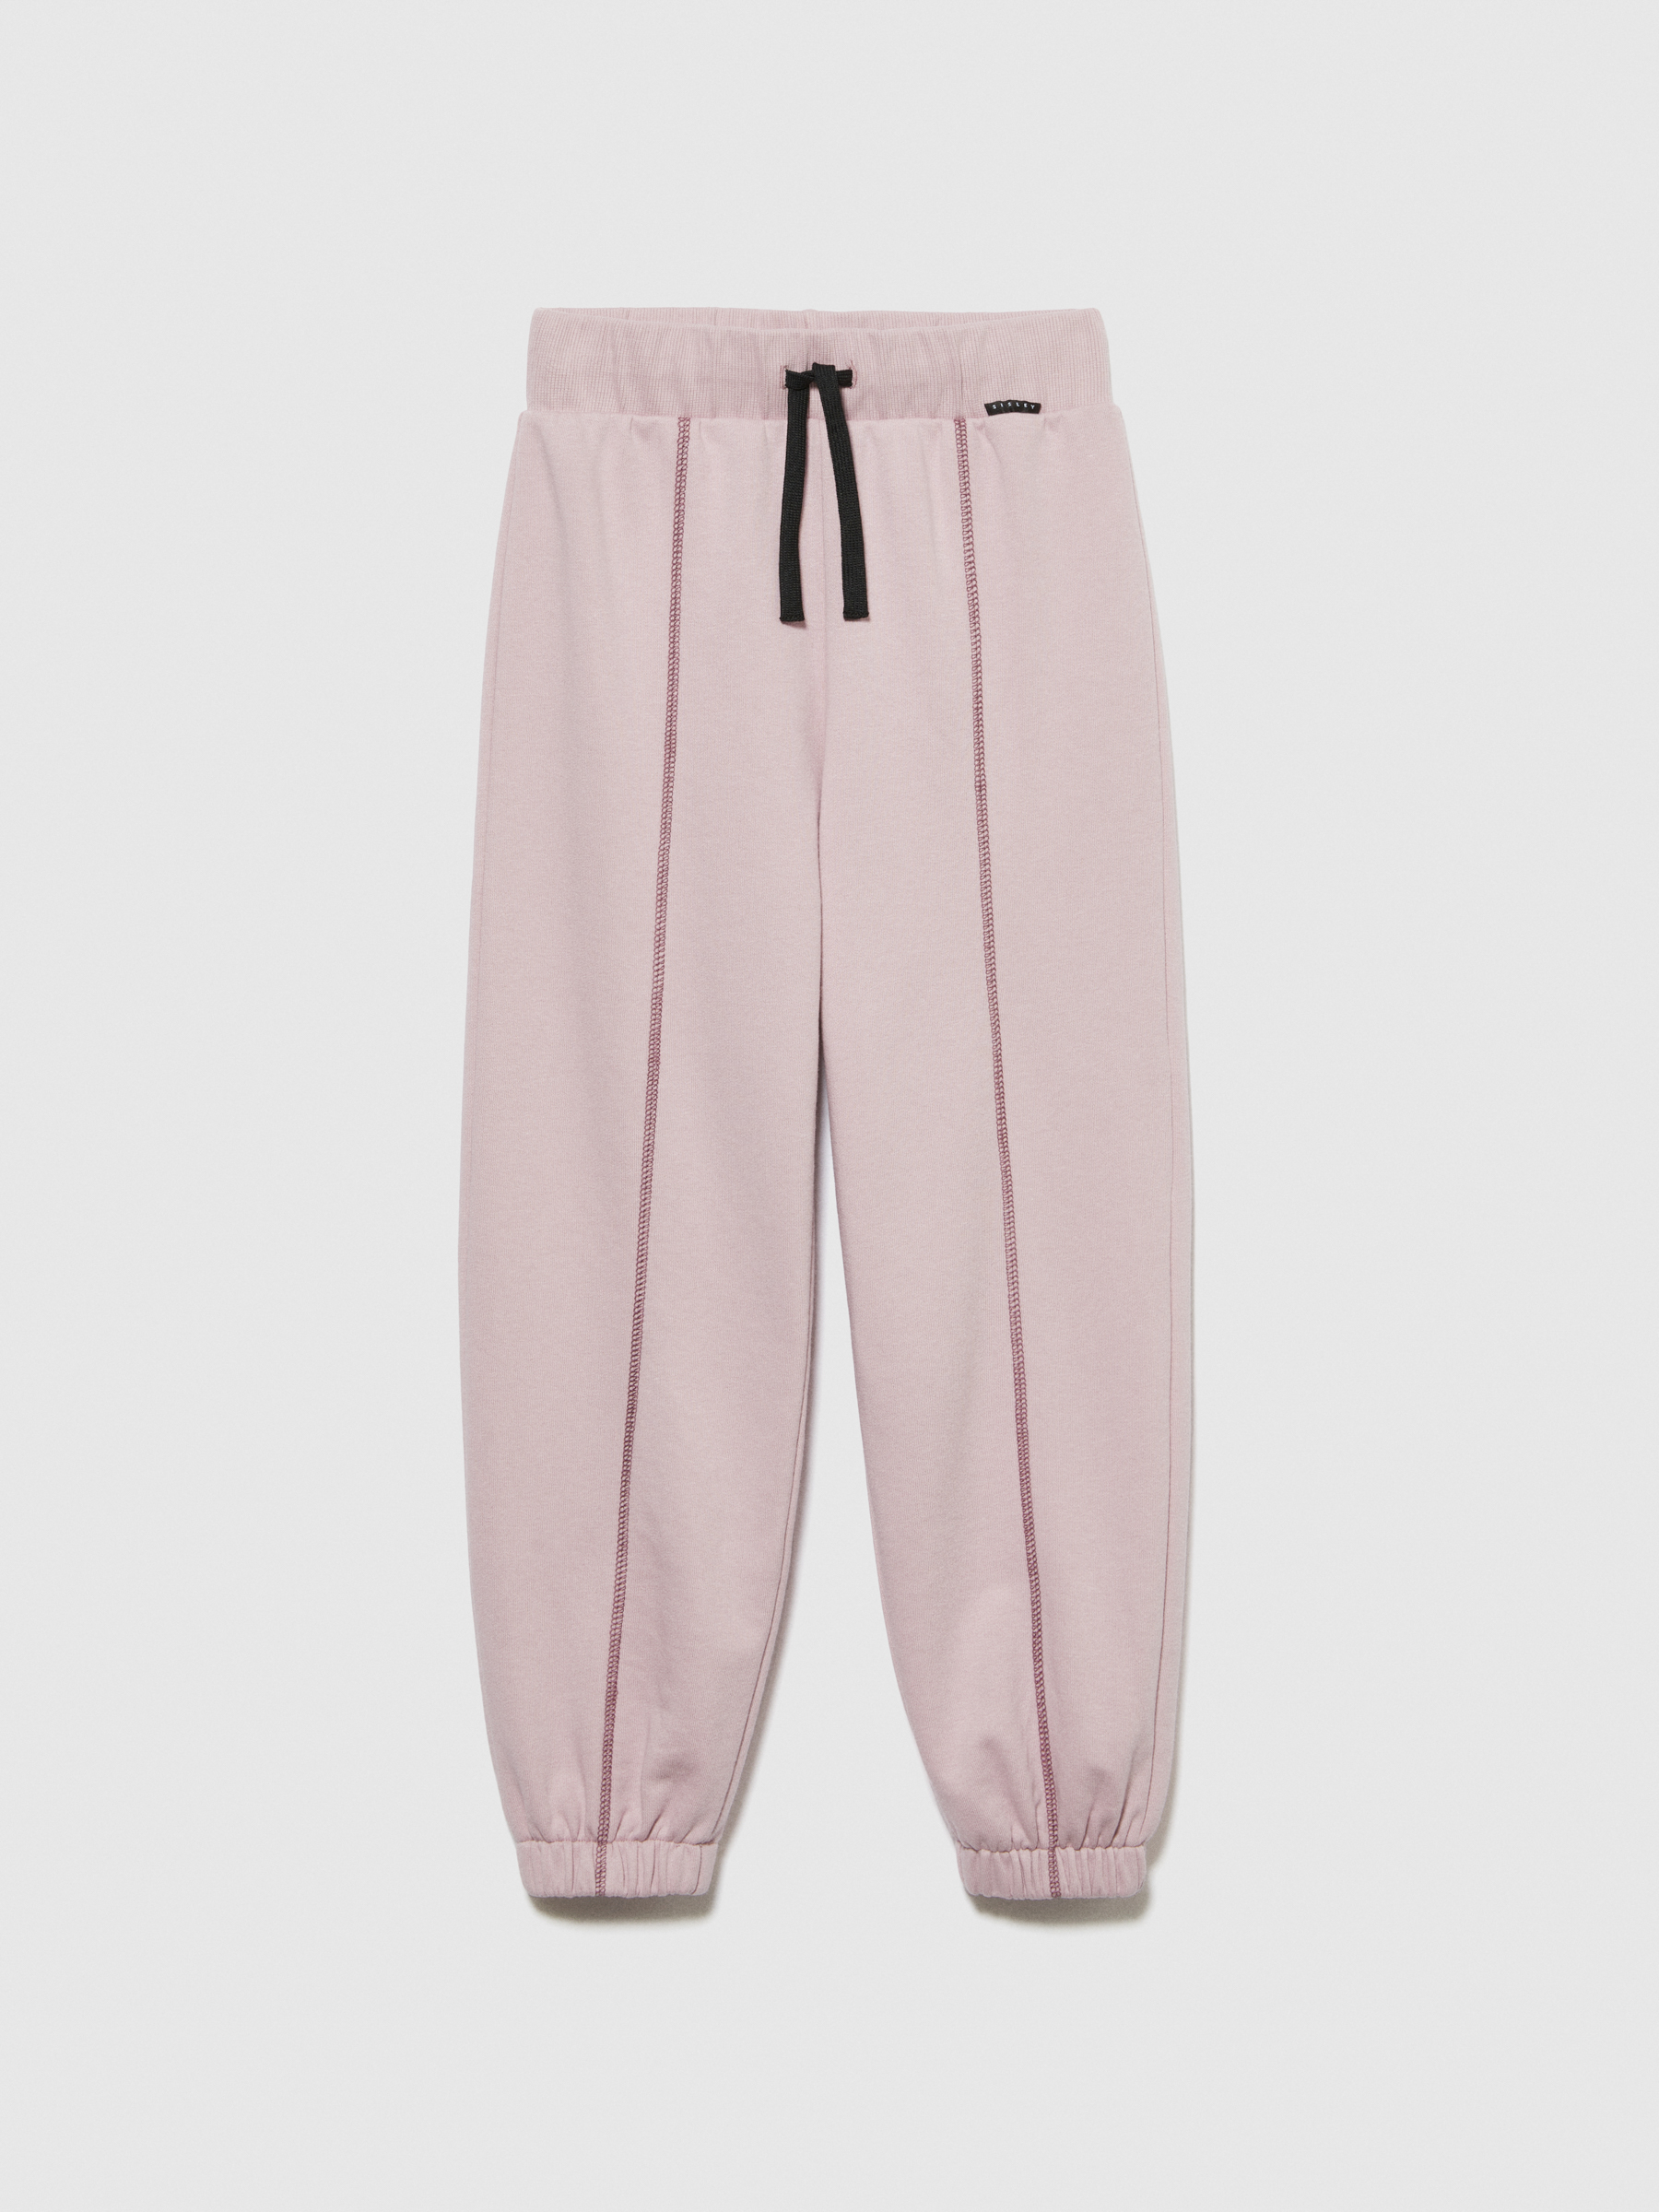 Sisley Young - Oversized Fit Joggers, Woman, Pink, Size: L